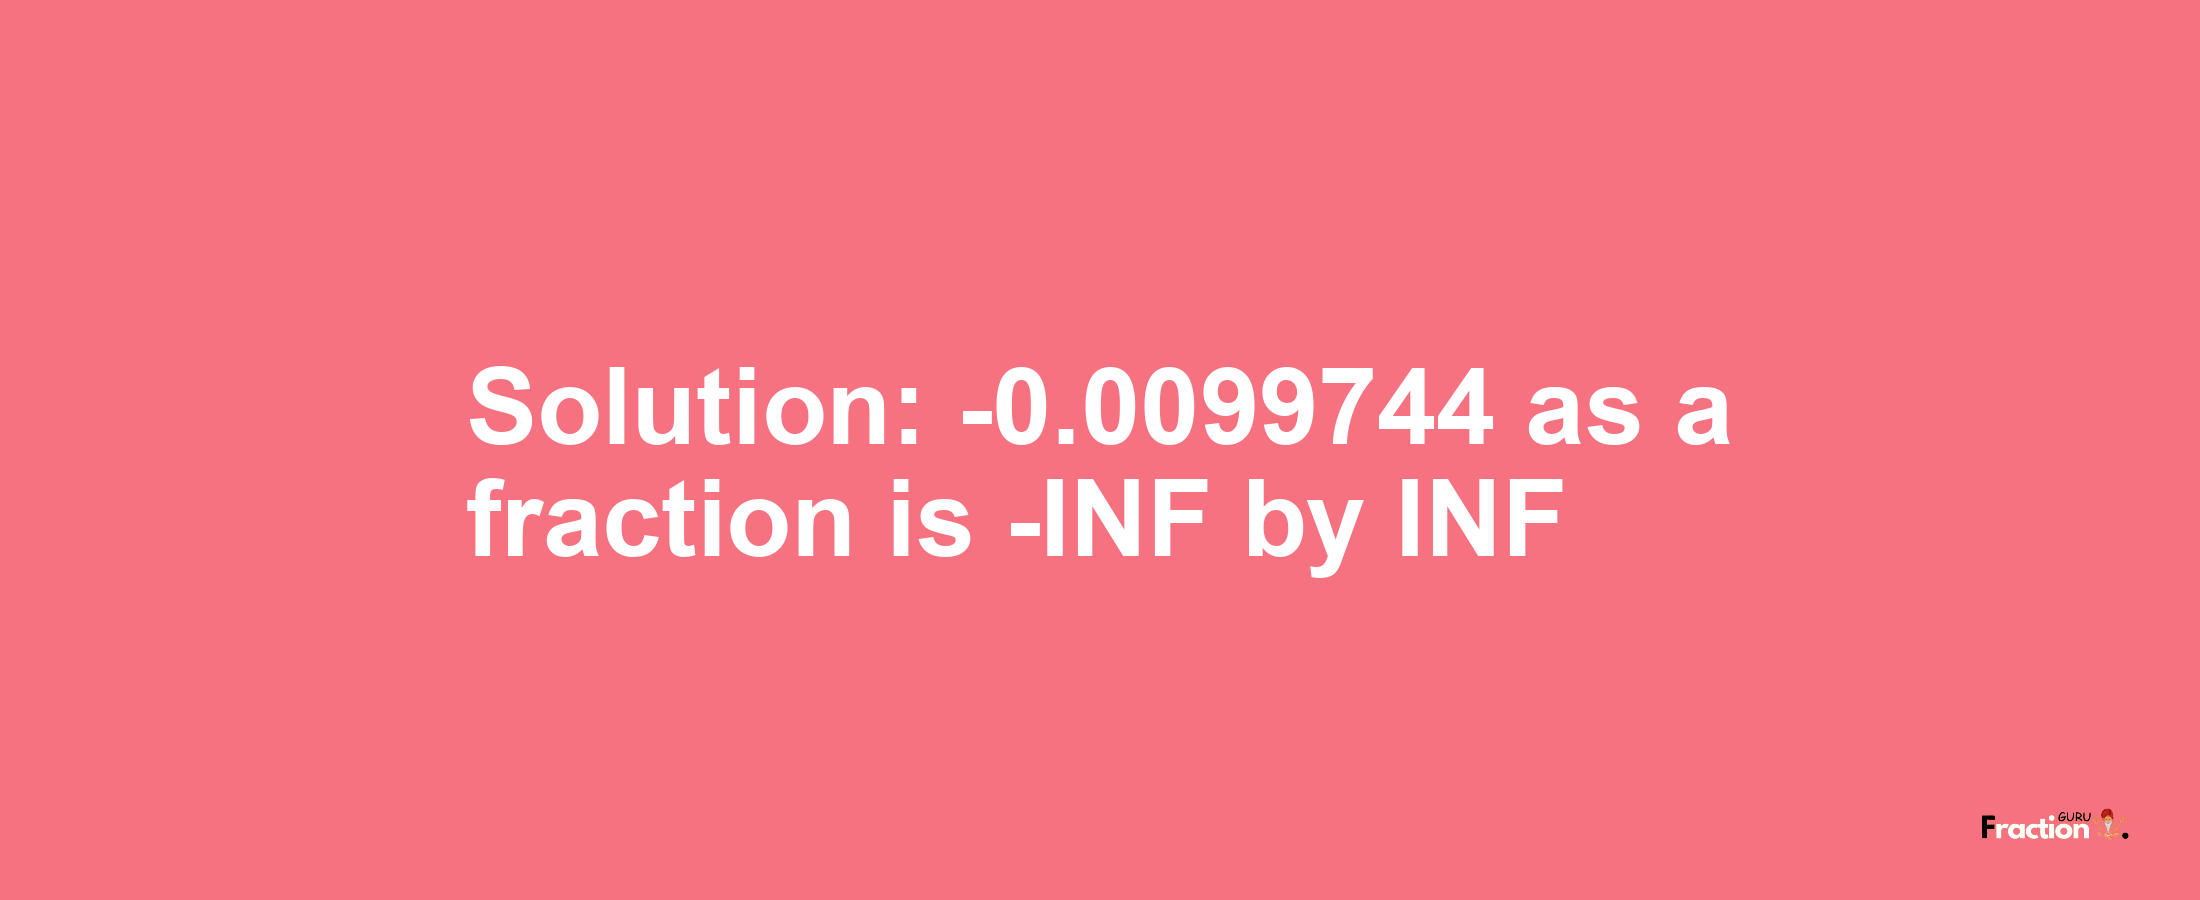 Solution:-0.0099744 as a fraction is -INF/INF